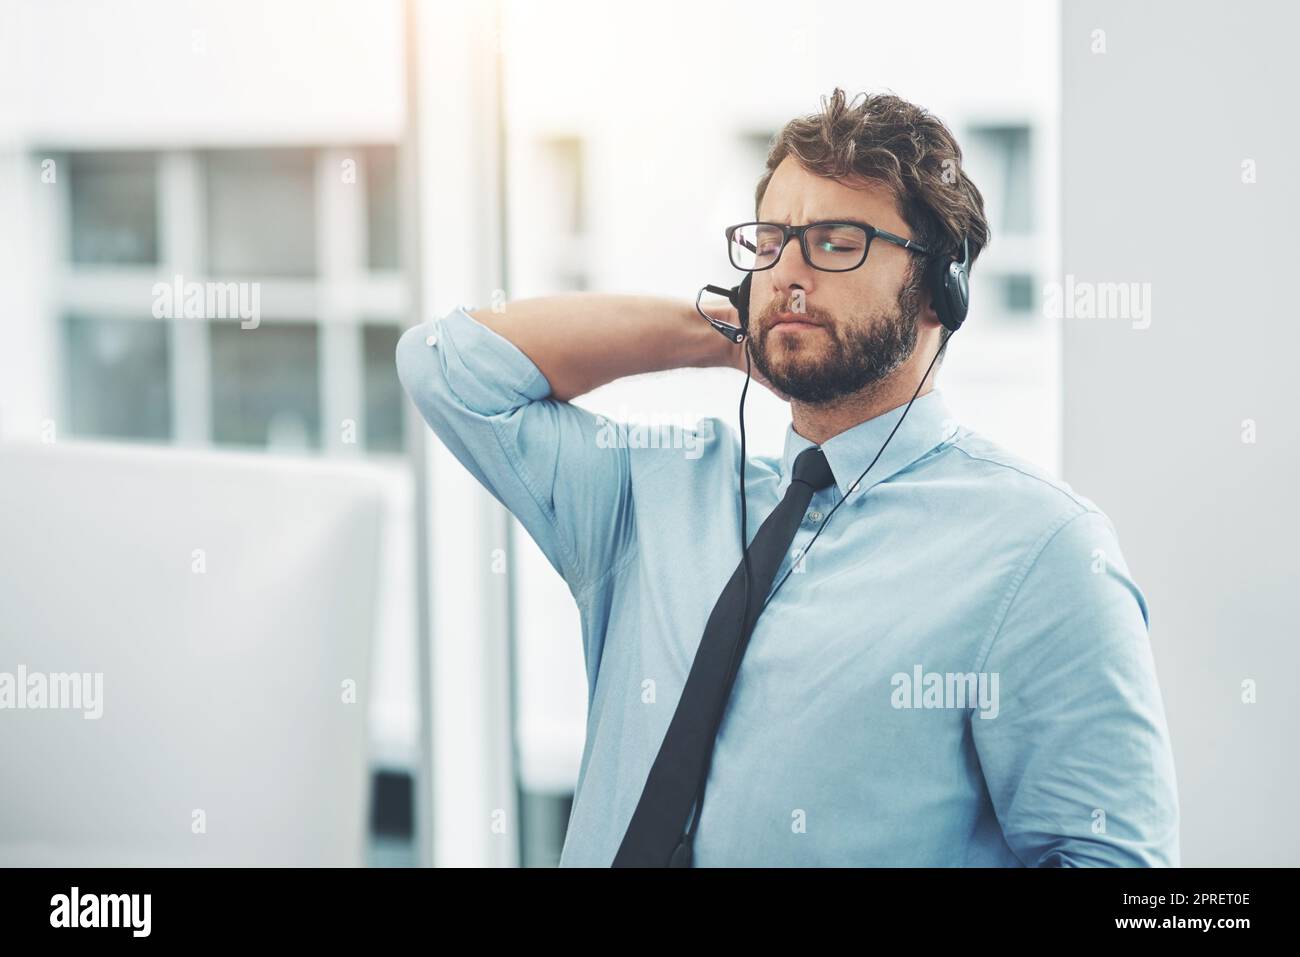 Getting a difficult call 5 minutes before home time. a young man experiencing stress while working in a call center. Stock Photo